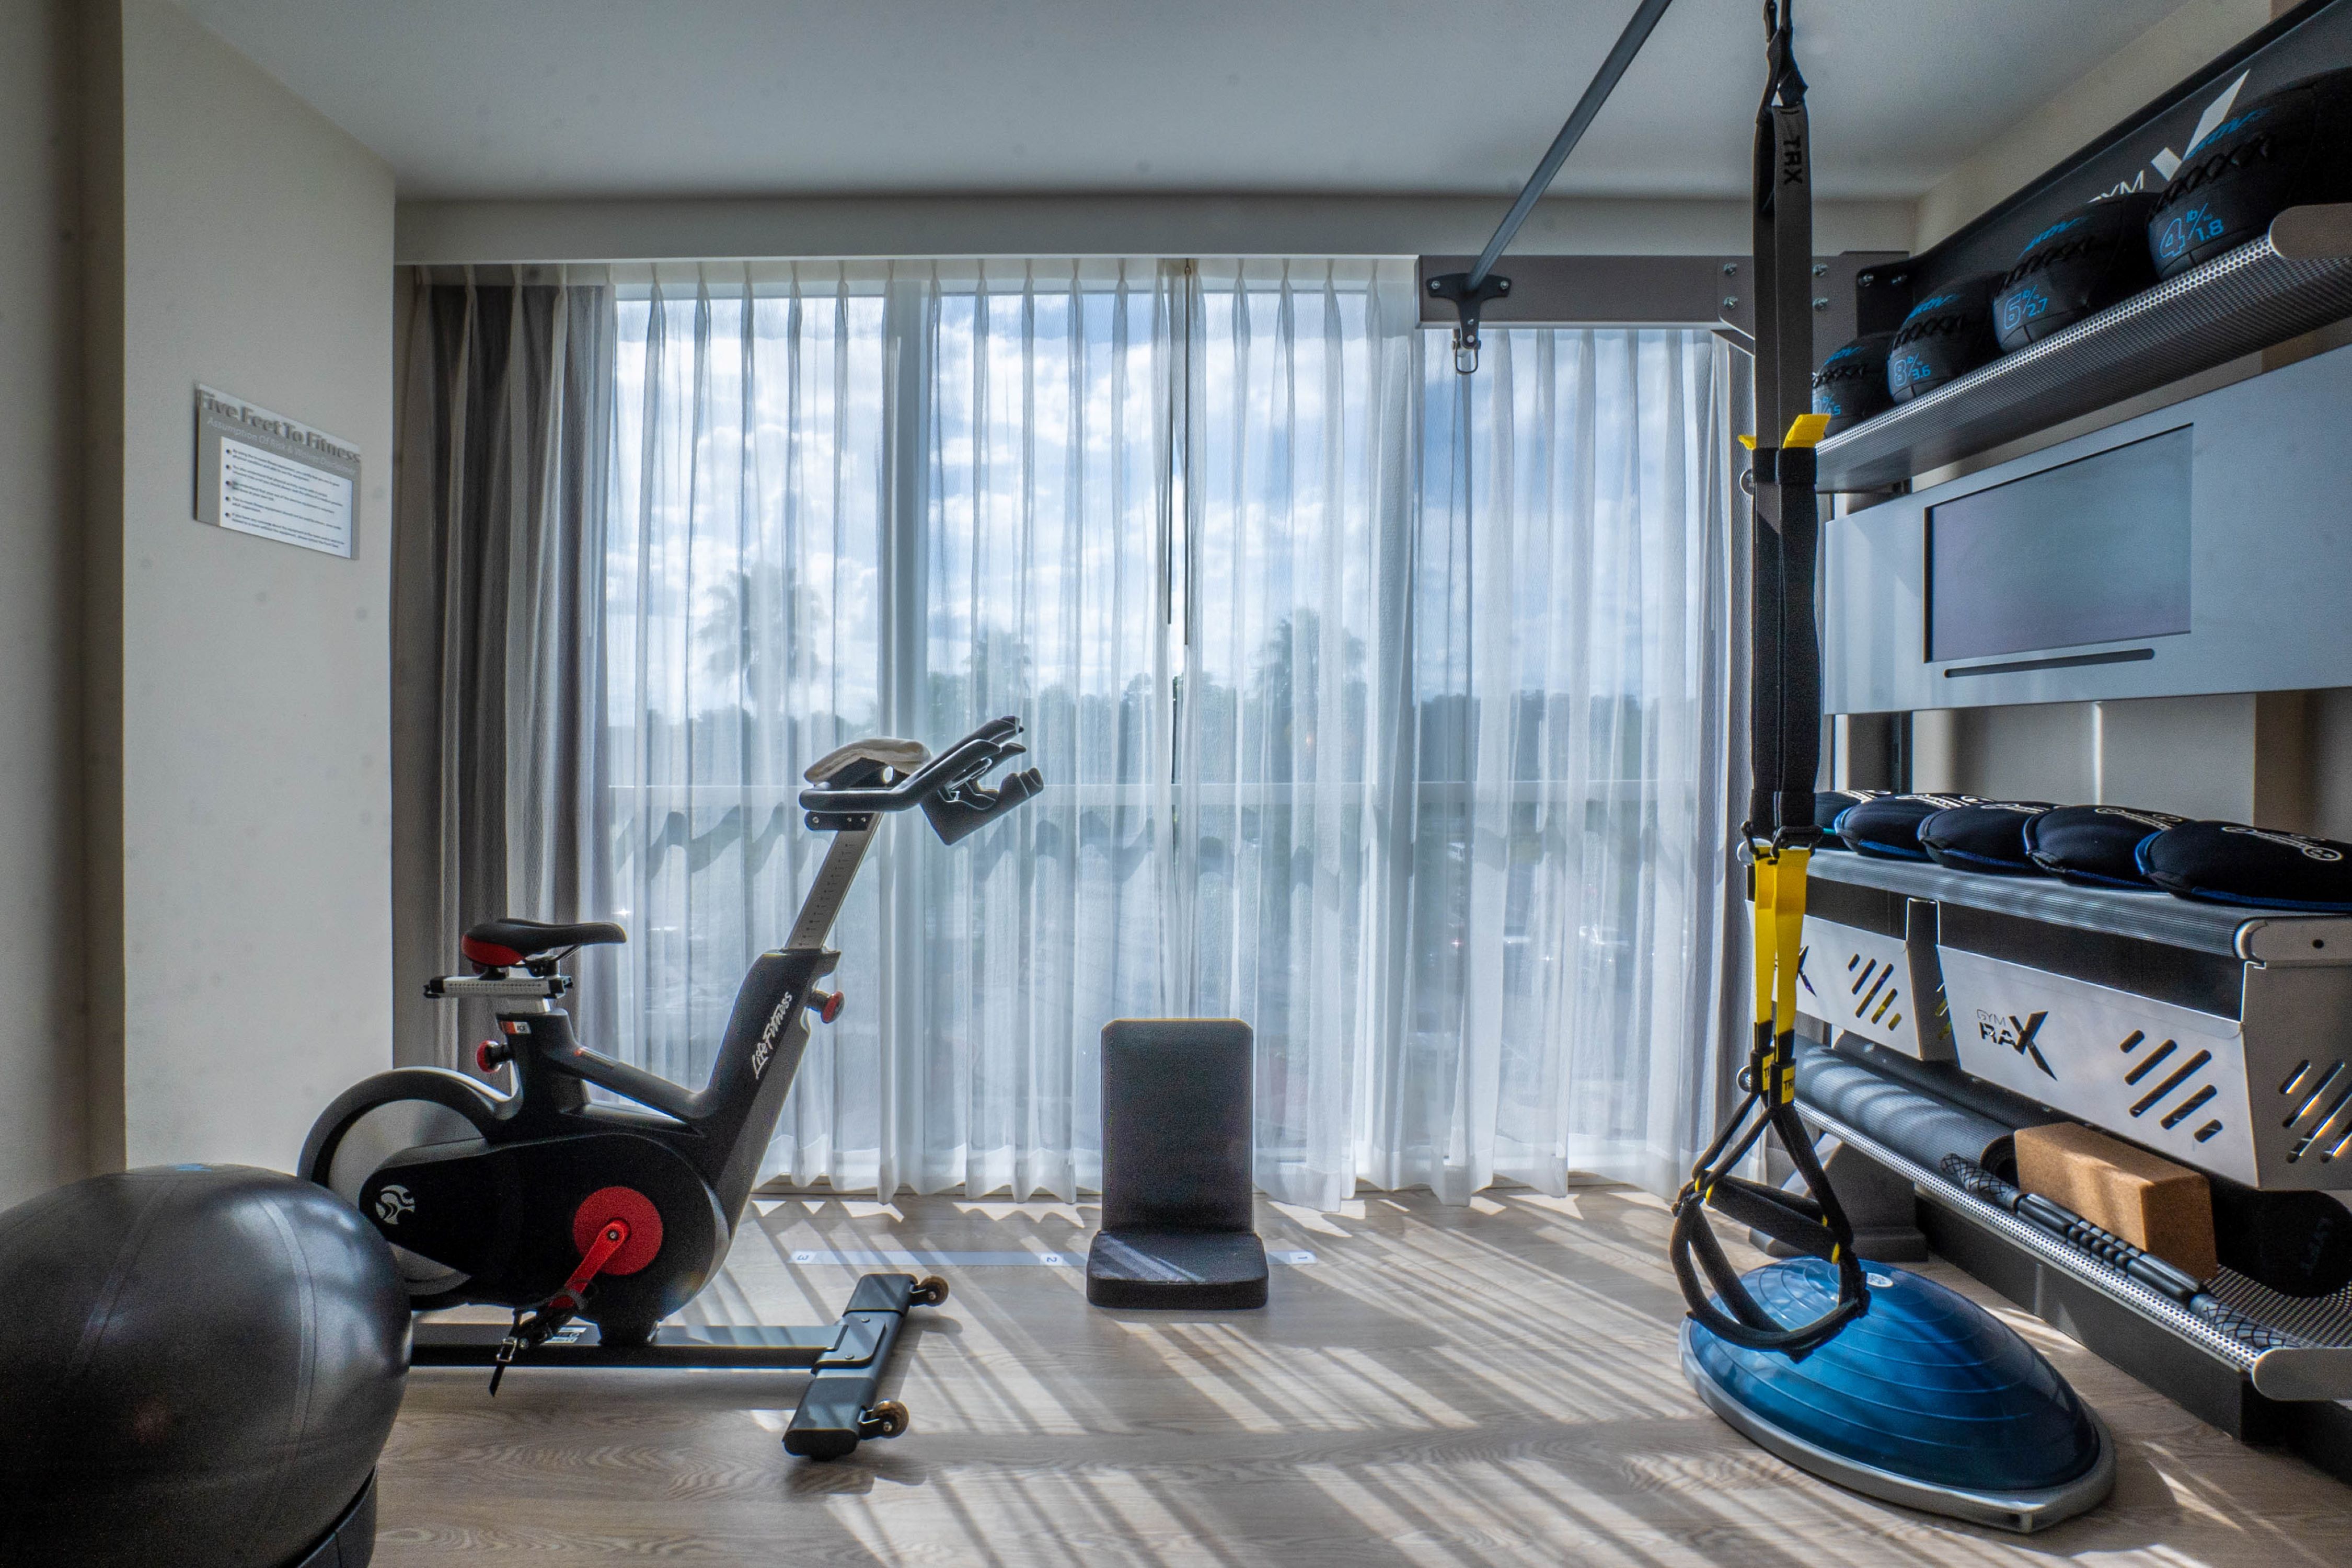 Five Feet to Fitness Room with Bike and Workout Equipement